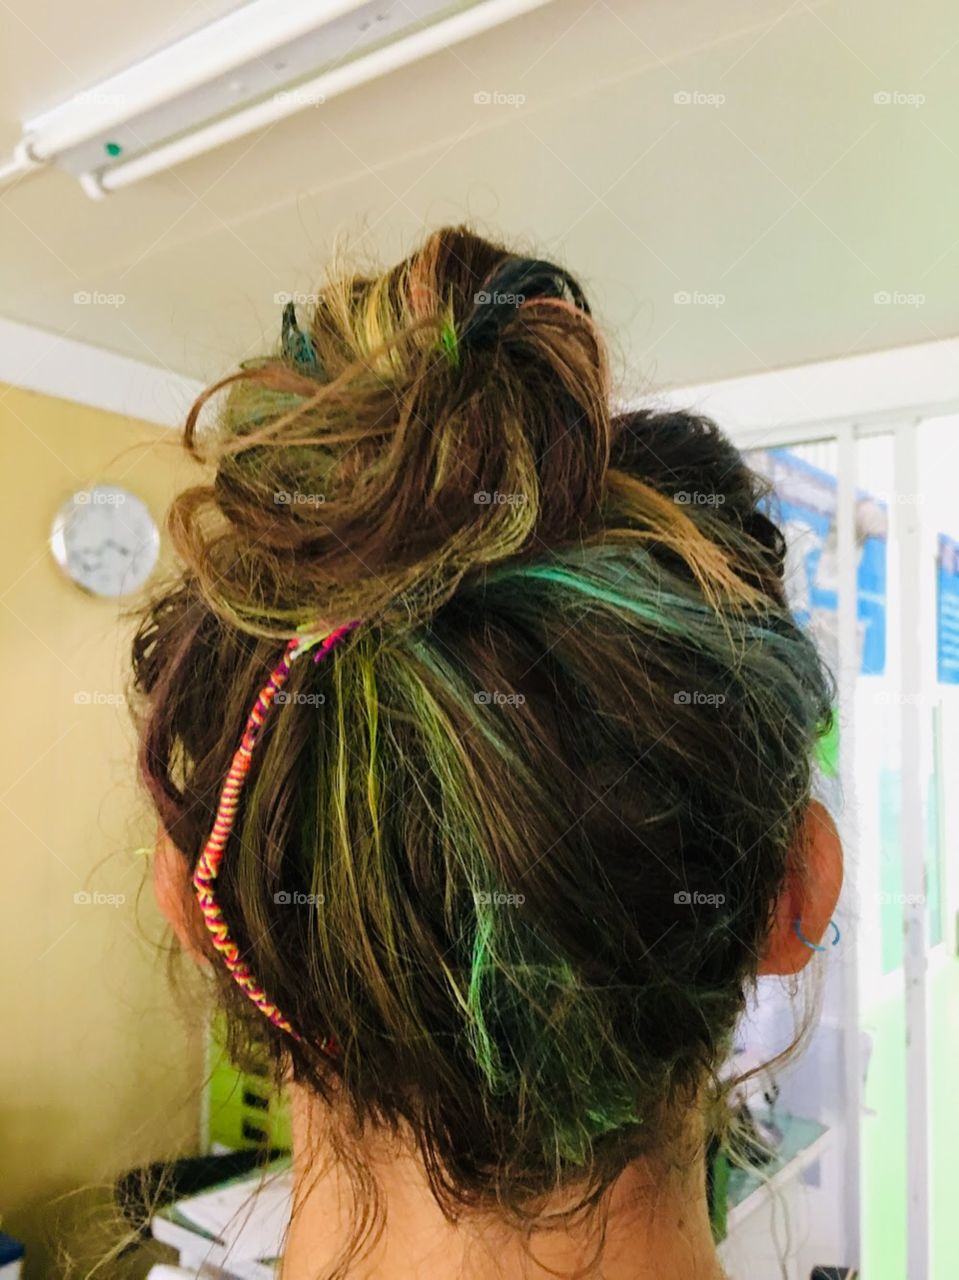 Hair dyed with neon pastels to give it such a rainbow mix in her hair. Didn’t last very long but it looked nice and was easy to clean with just shampoo. 